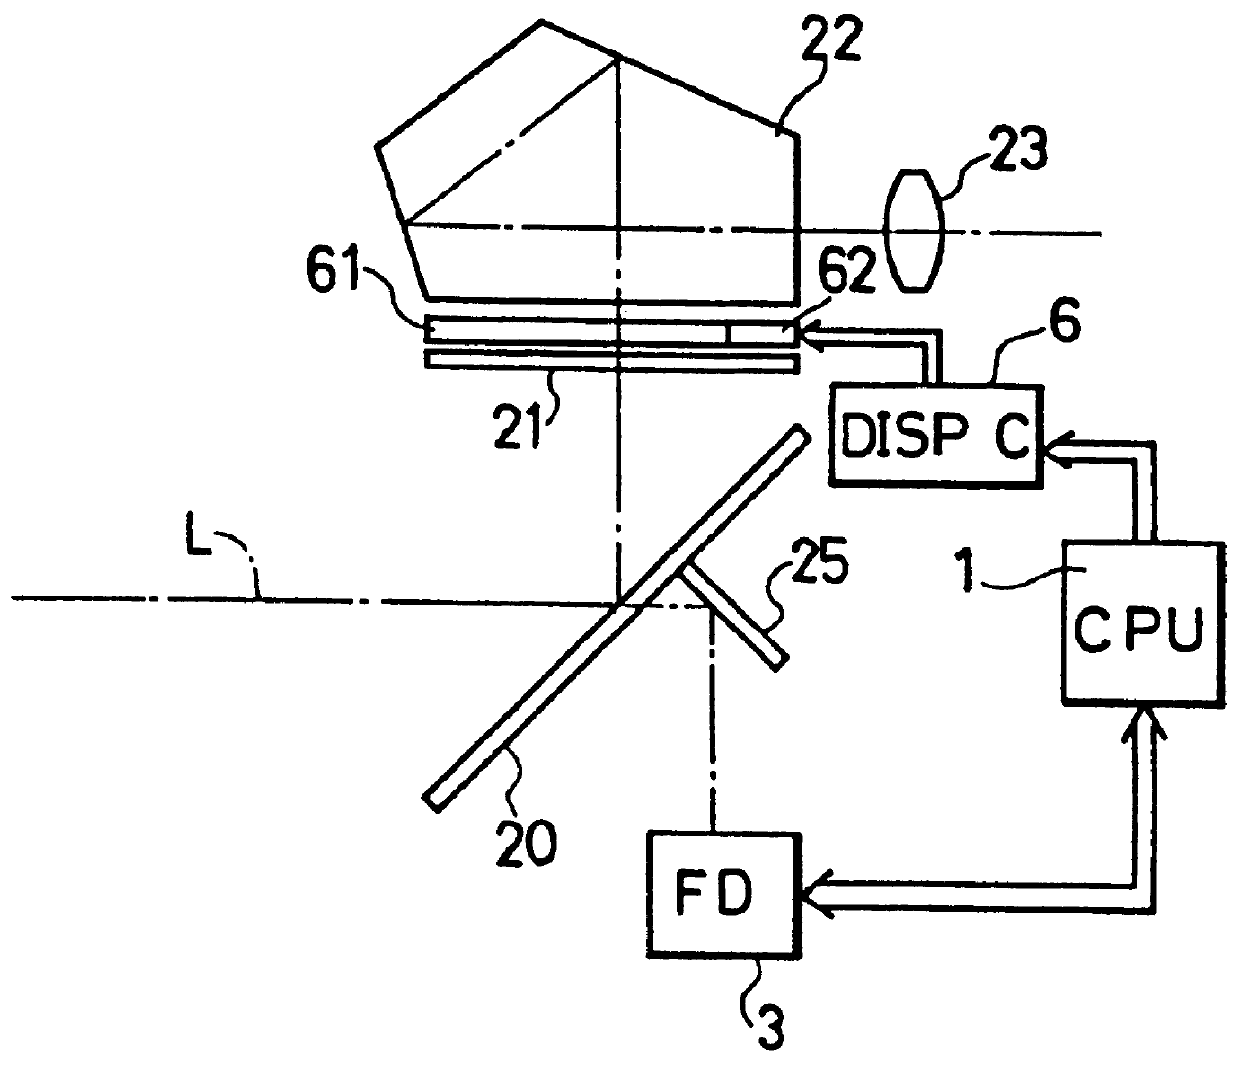 Camera capable of displaying the level of visual effect